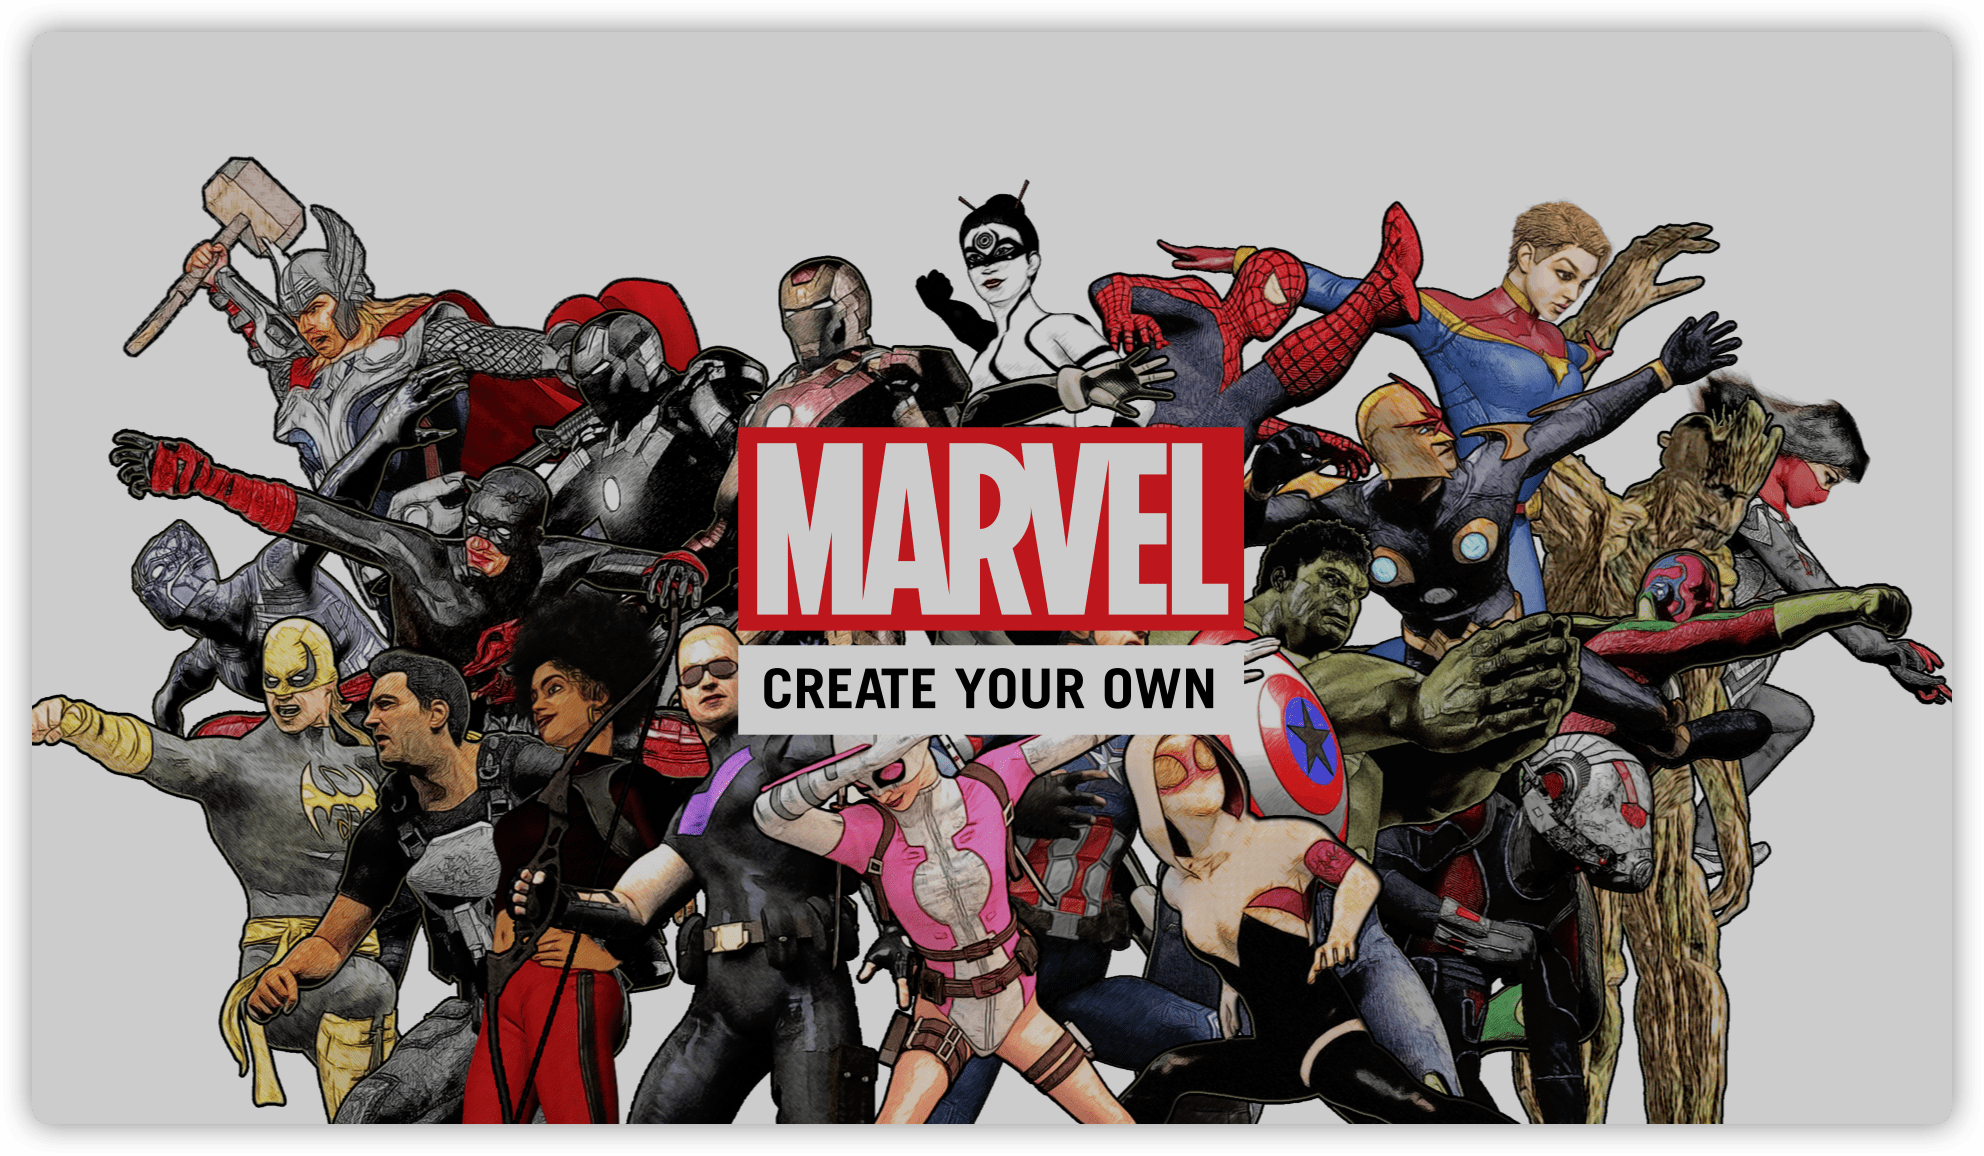 Marvel Create Your Own